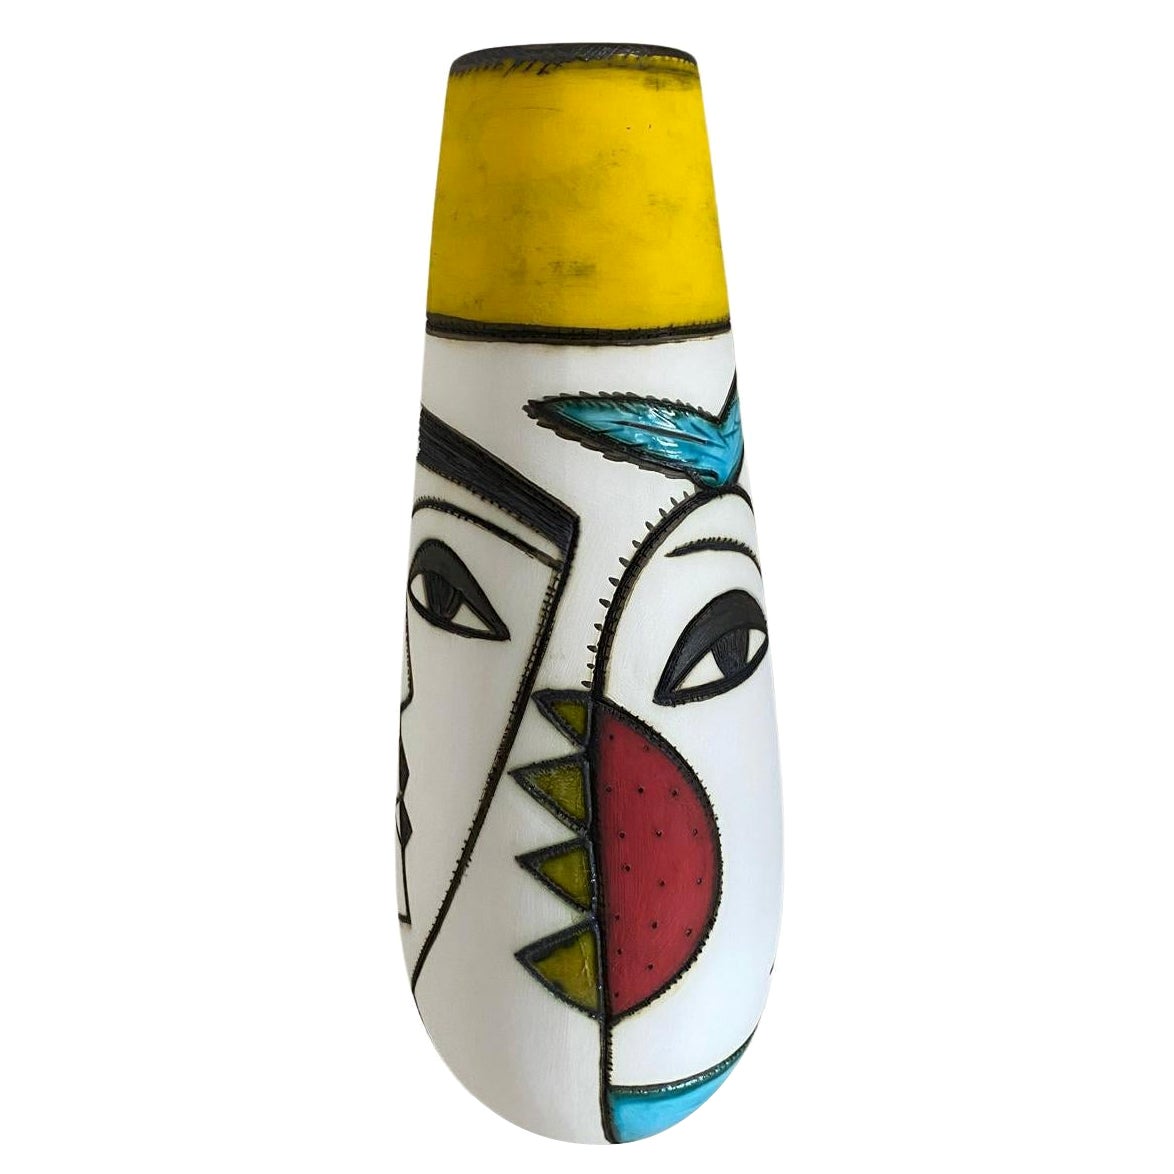 South African Art Pottery by Charmaine Haines, Conical Face Vase, 21st Century